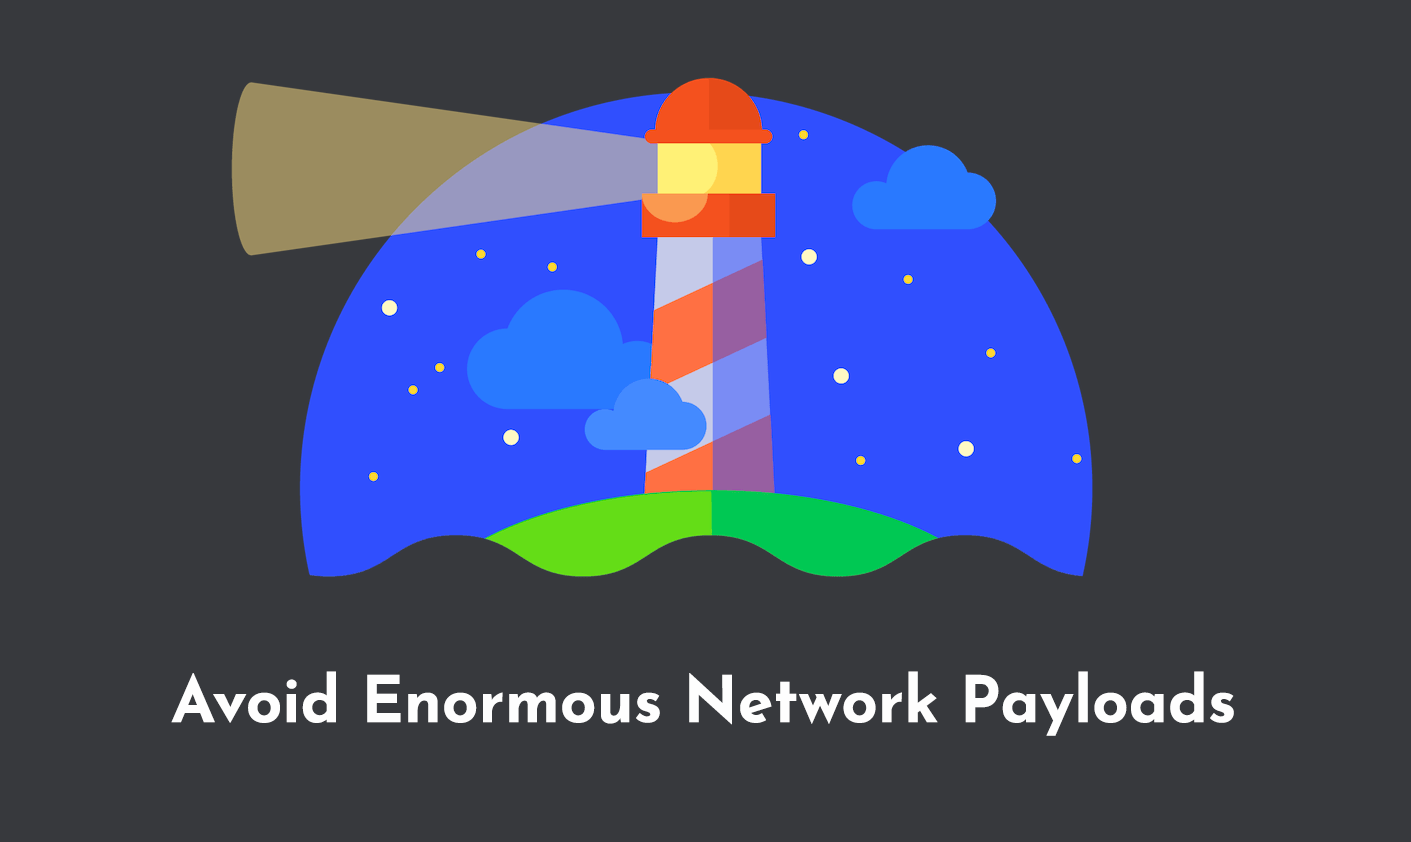 Avoid Enormous Network Payloads